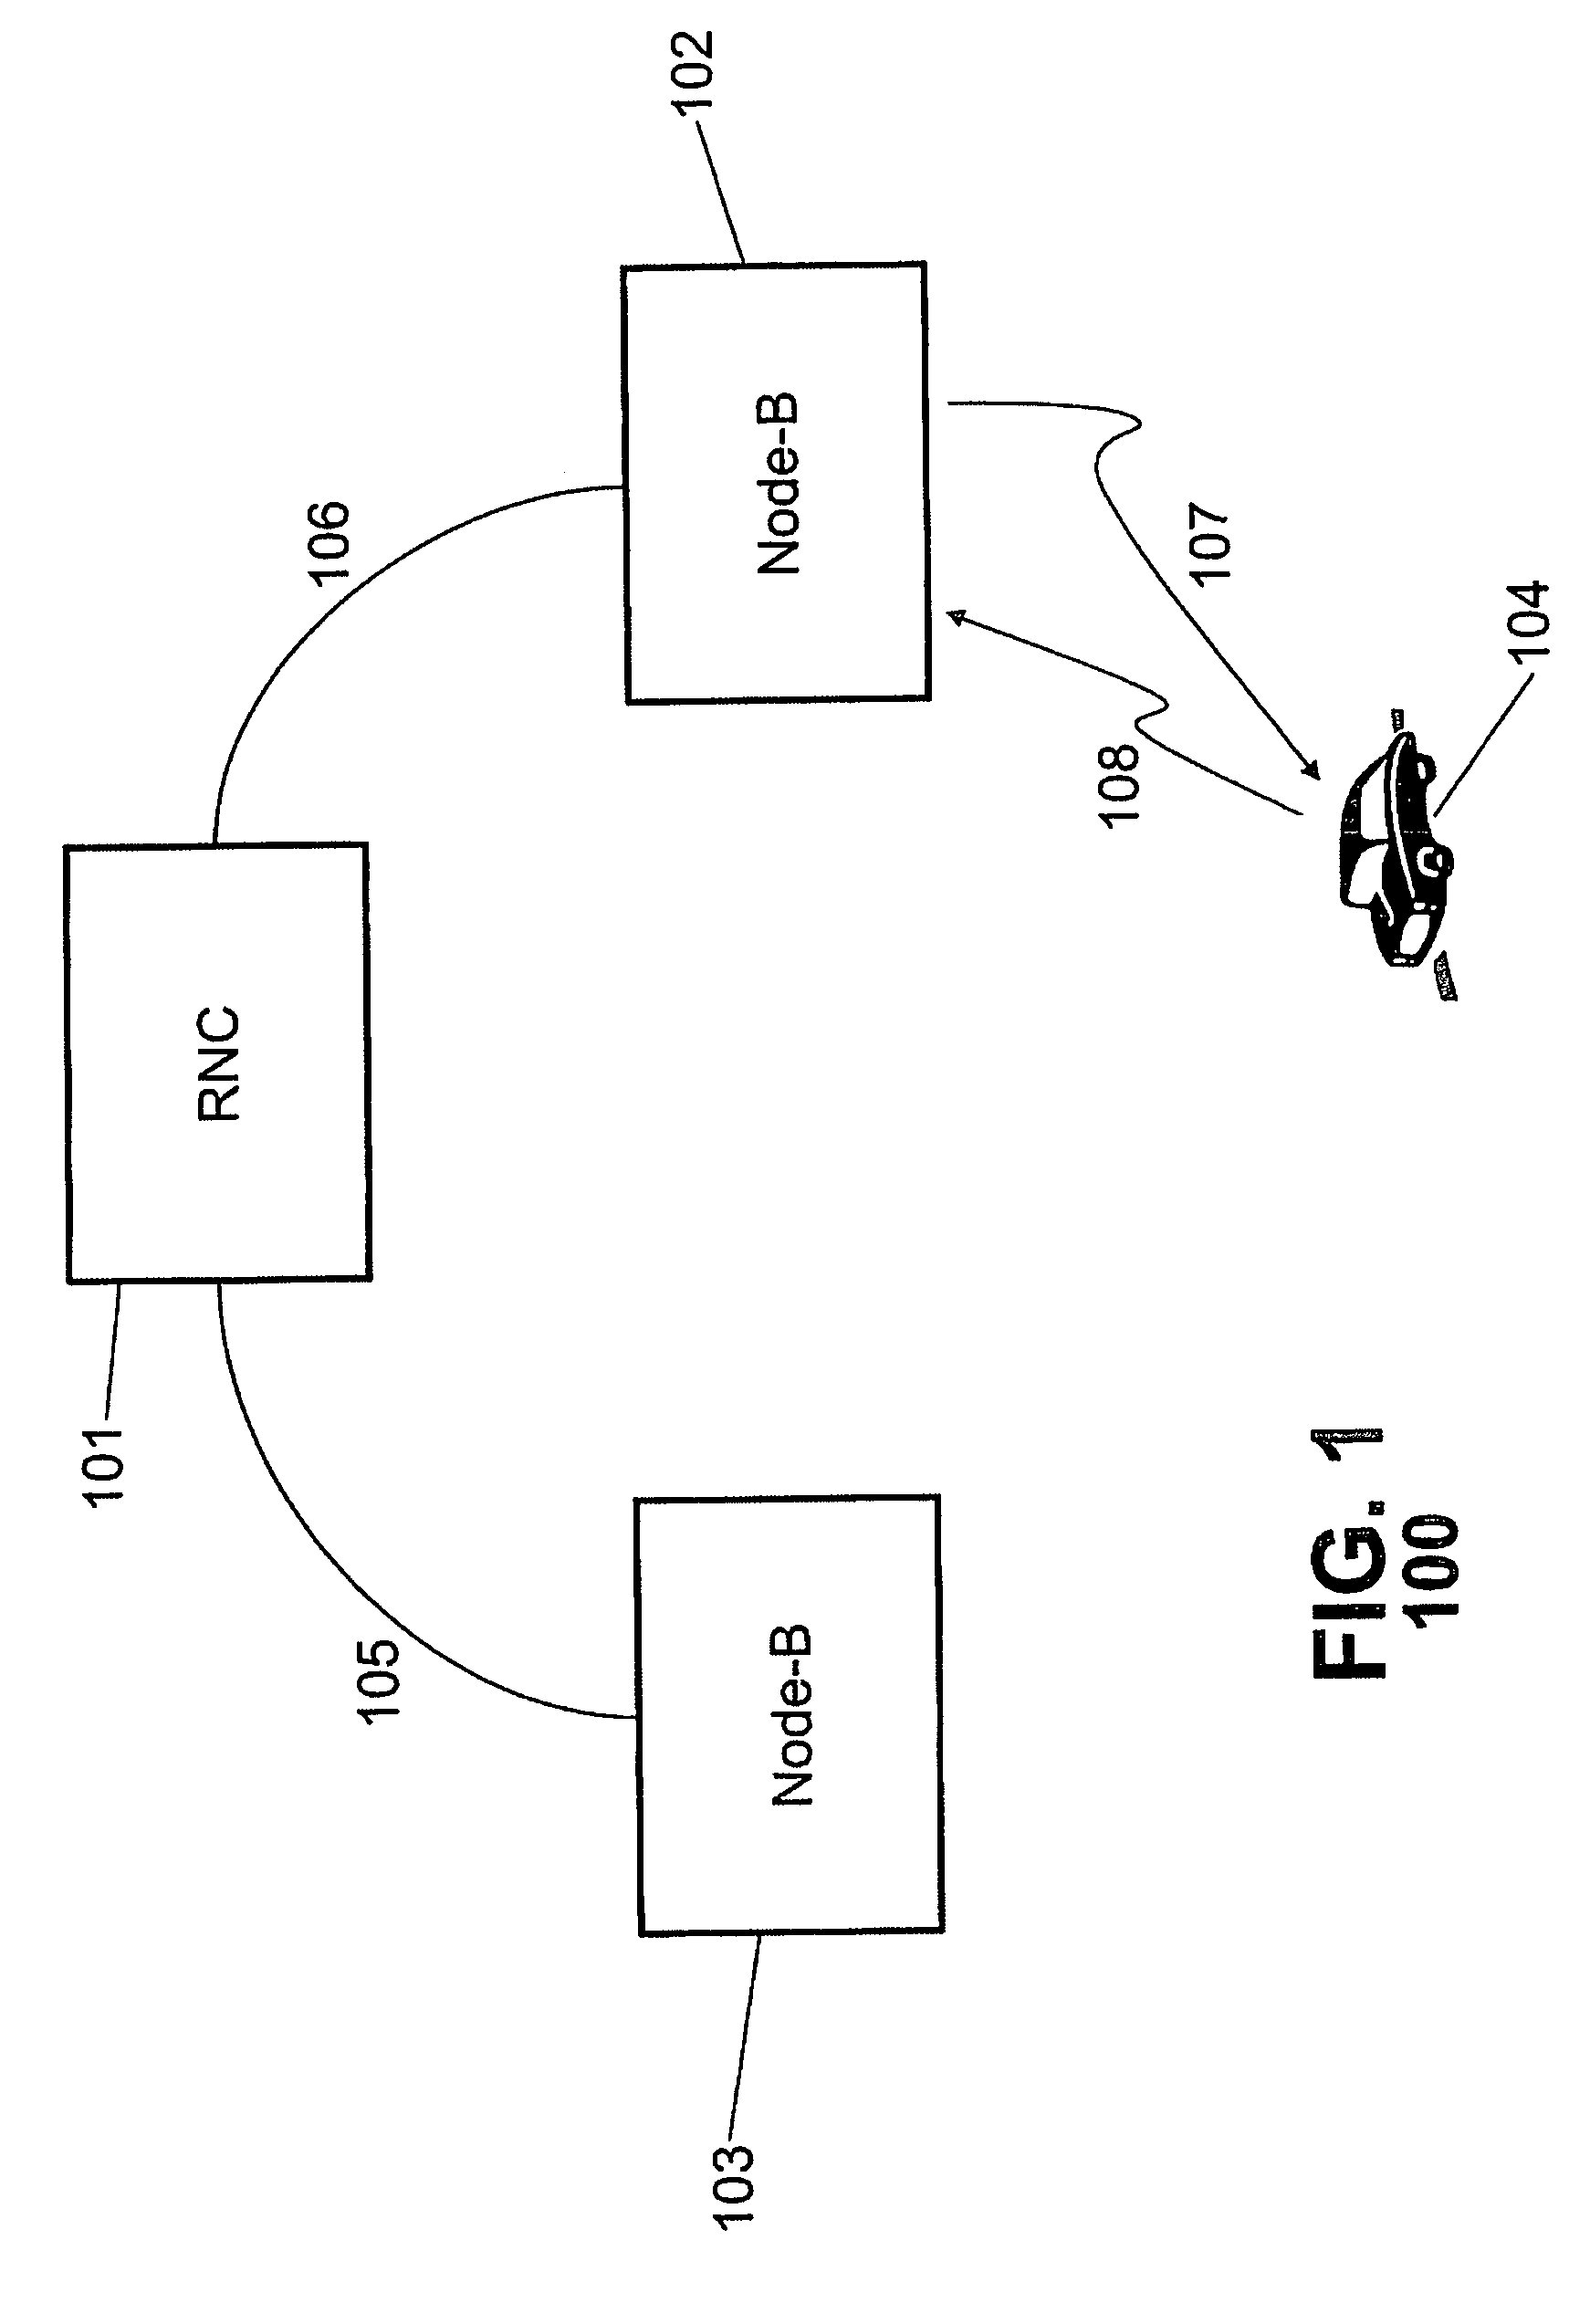 Outer loop power control method and apparatus for wireless communication systems